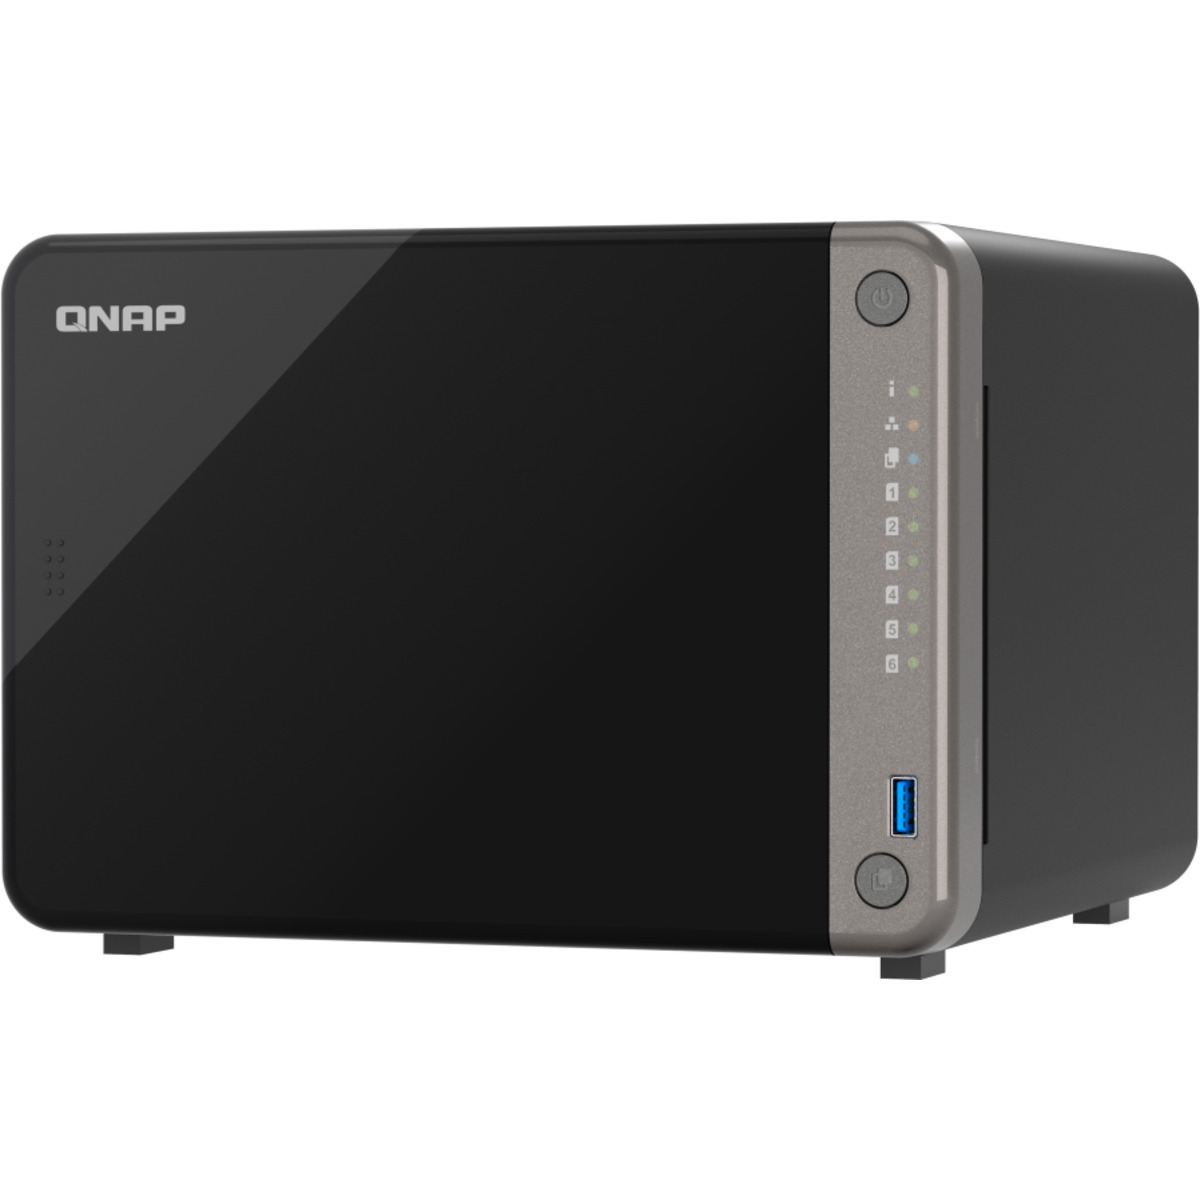 QNAP TS-AI642 48tb 6-Bay Desktop Multimedia / Power User / Business NAS - Network Attached Storage Device 3x16tb Seagate IronWolf Pro ST16000NT001 3.5 7200rpm SATA 6Gb/s HDD NAS Class Drives Installed - Burn-In Tested - ON SALE TS-AI642